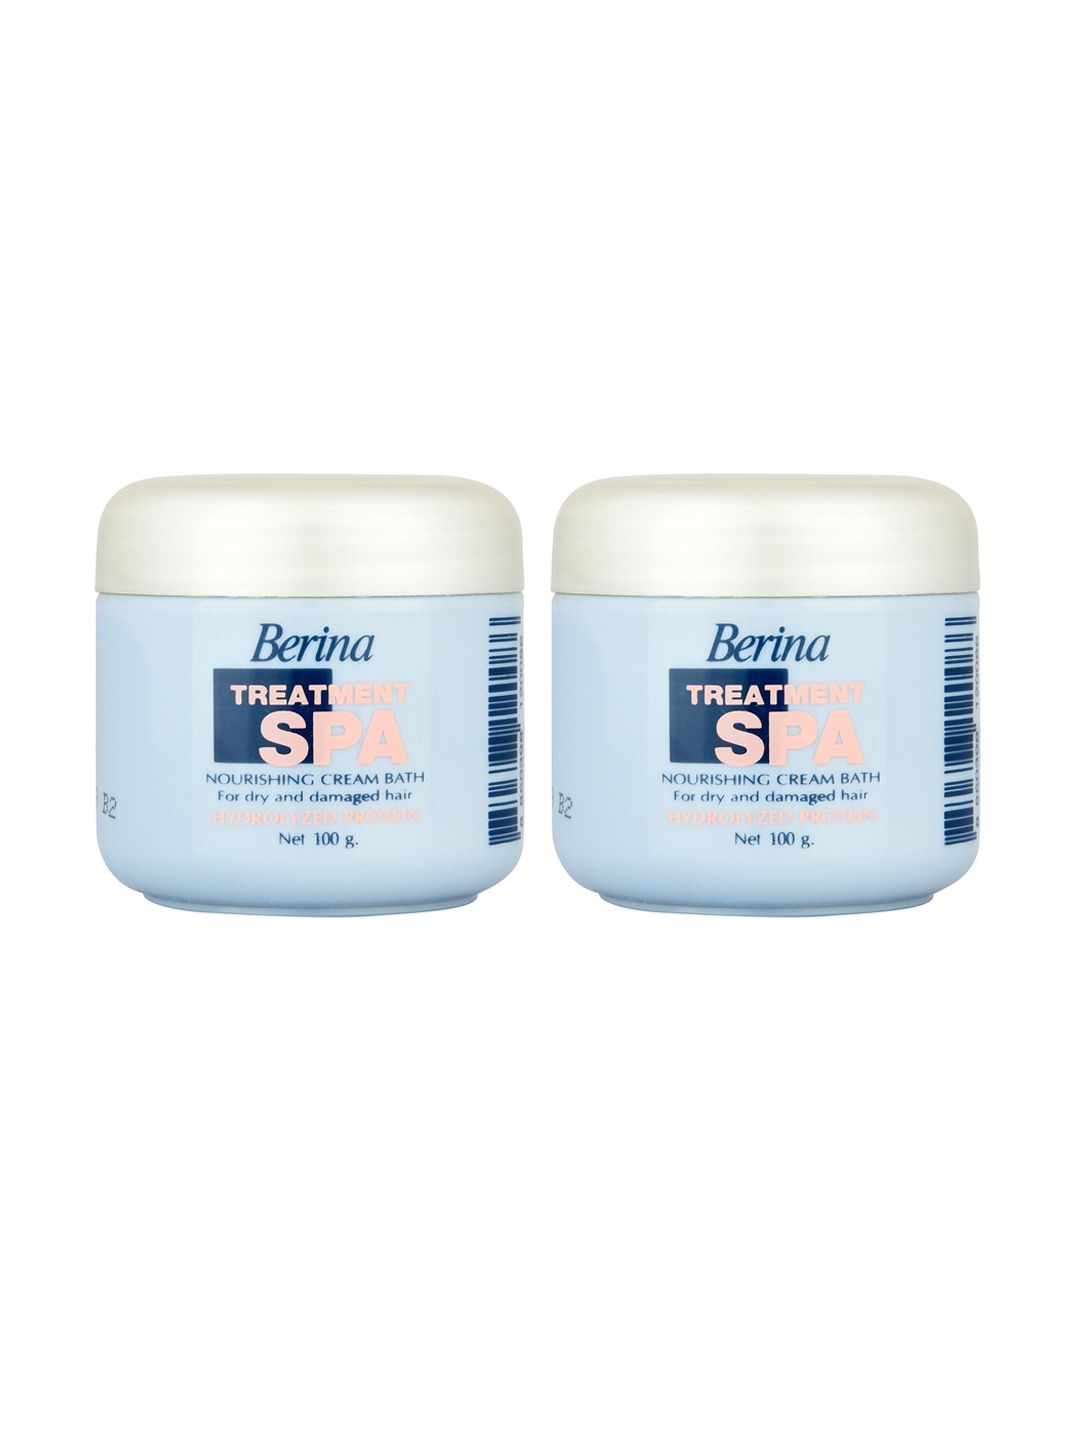 Berina Pack of 2 Hair Treatment Spa 100g Each Price in India